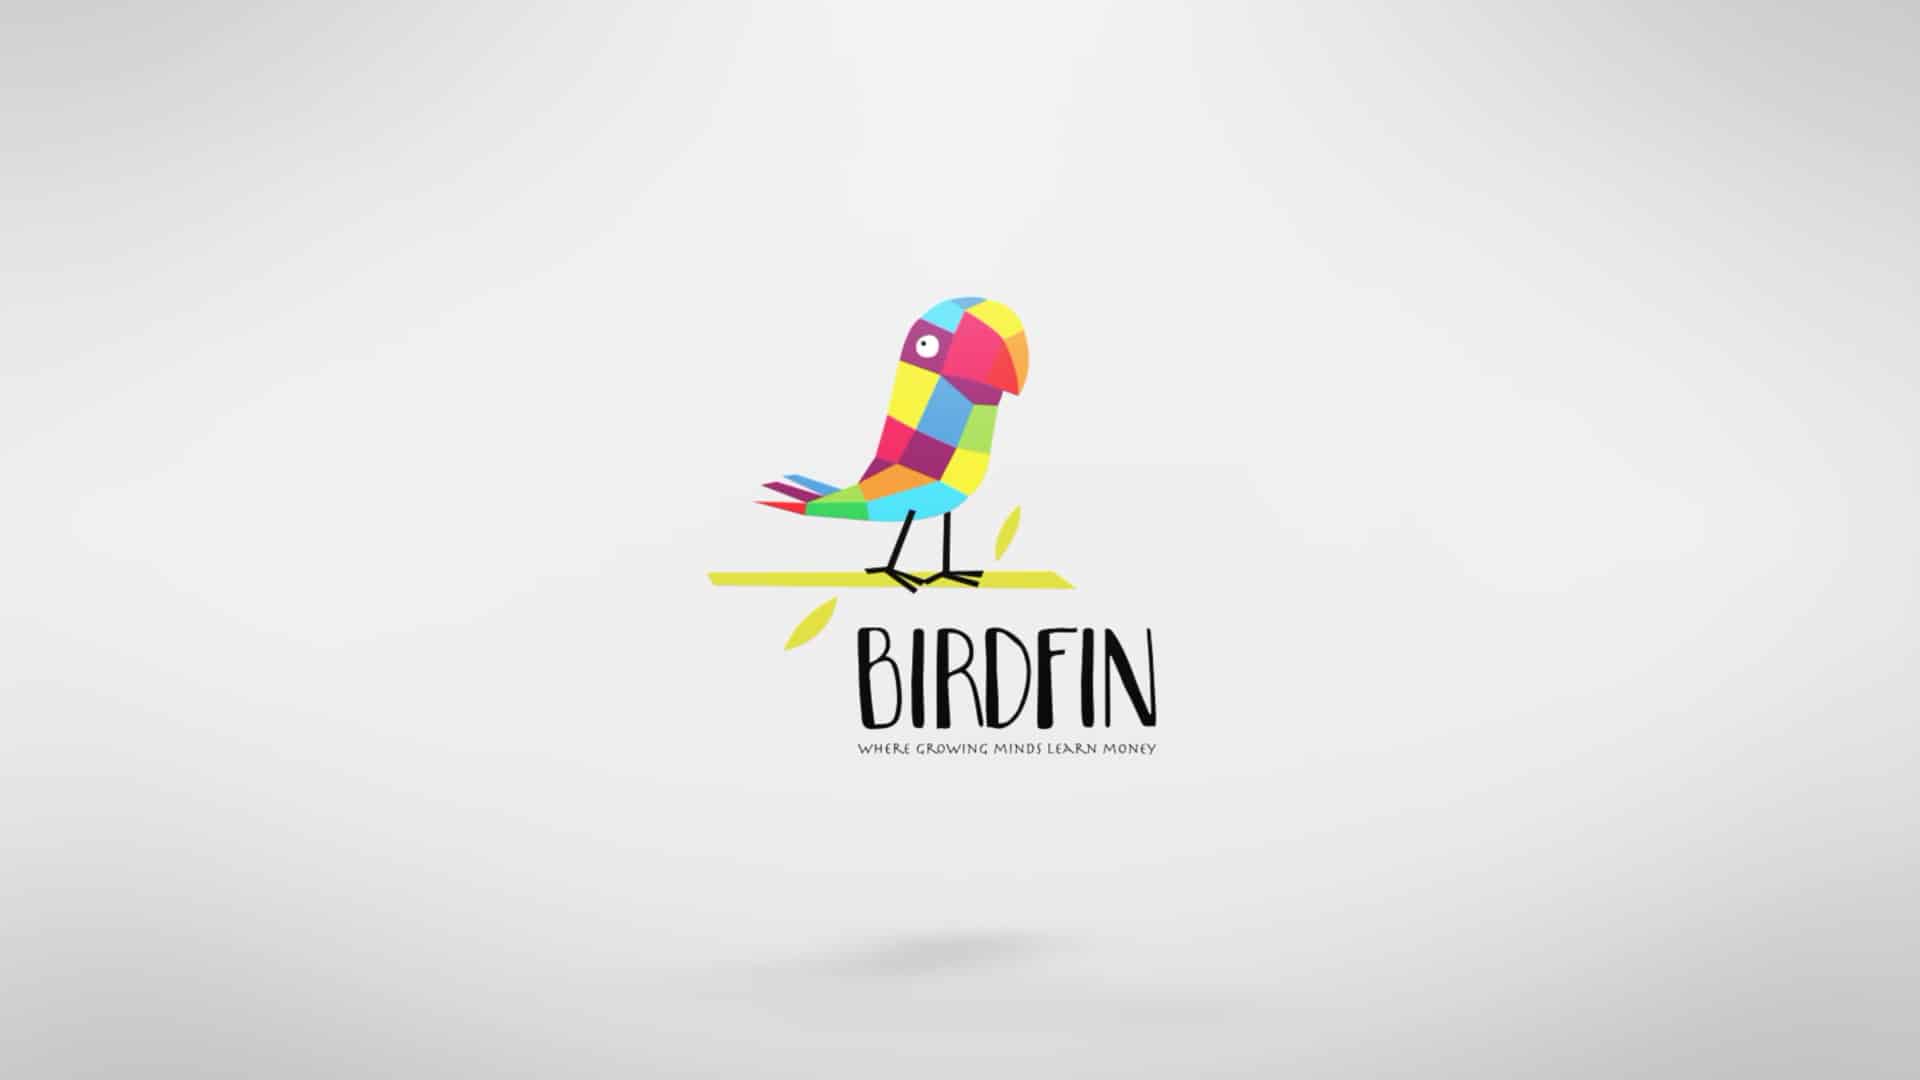 India's First Kids Fintech App - 'Birdfin' that Enables Financial and Life Skills Learning